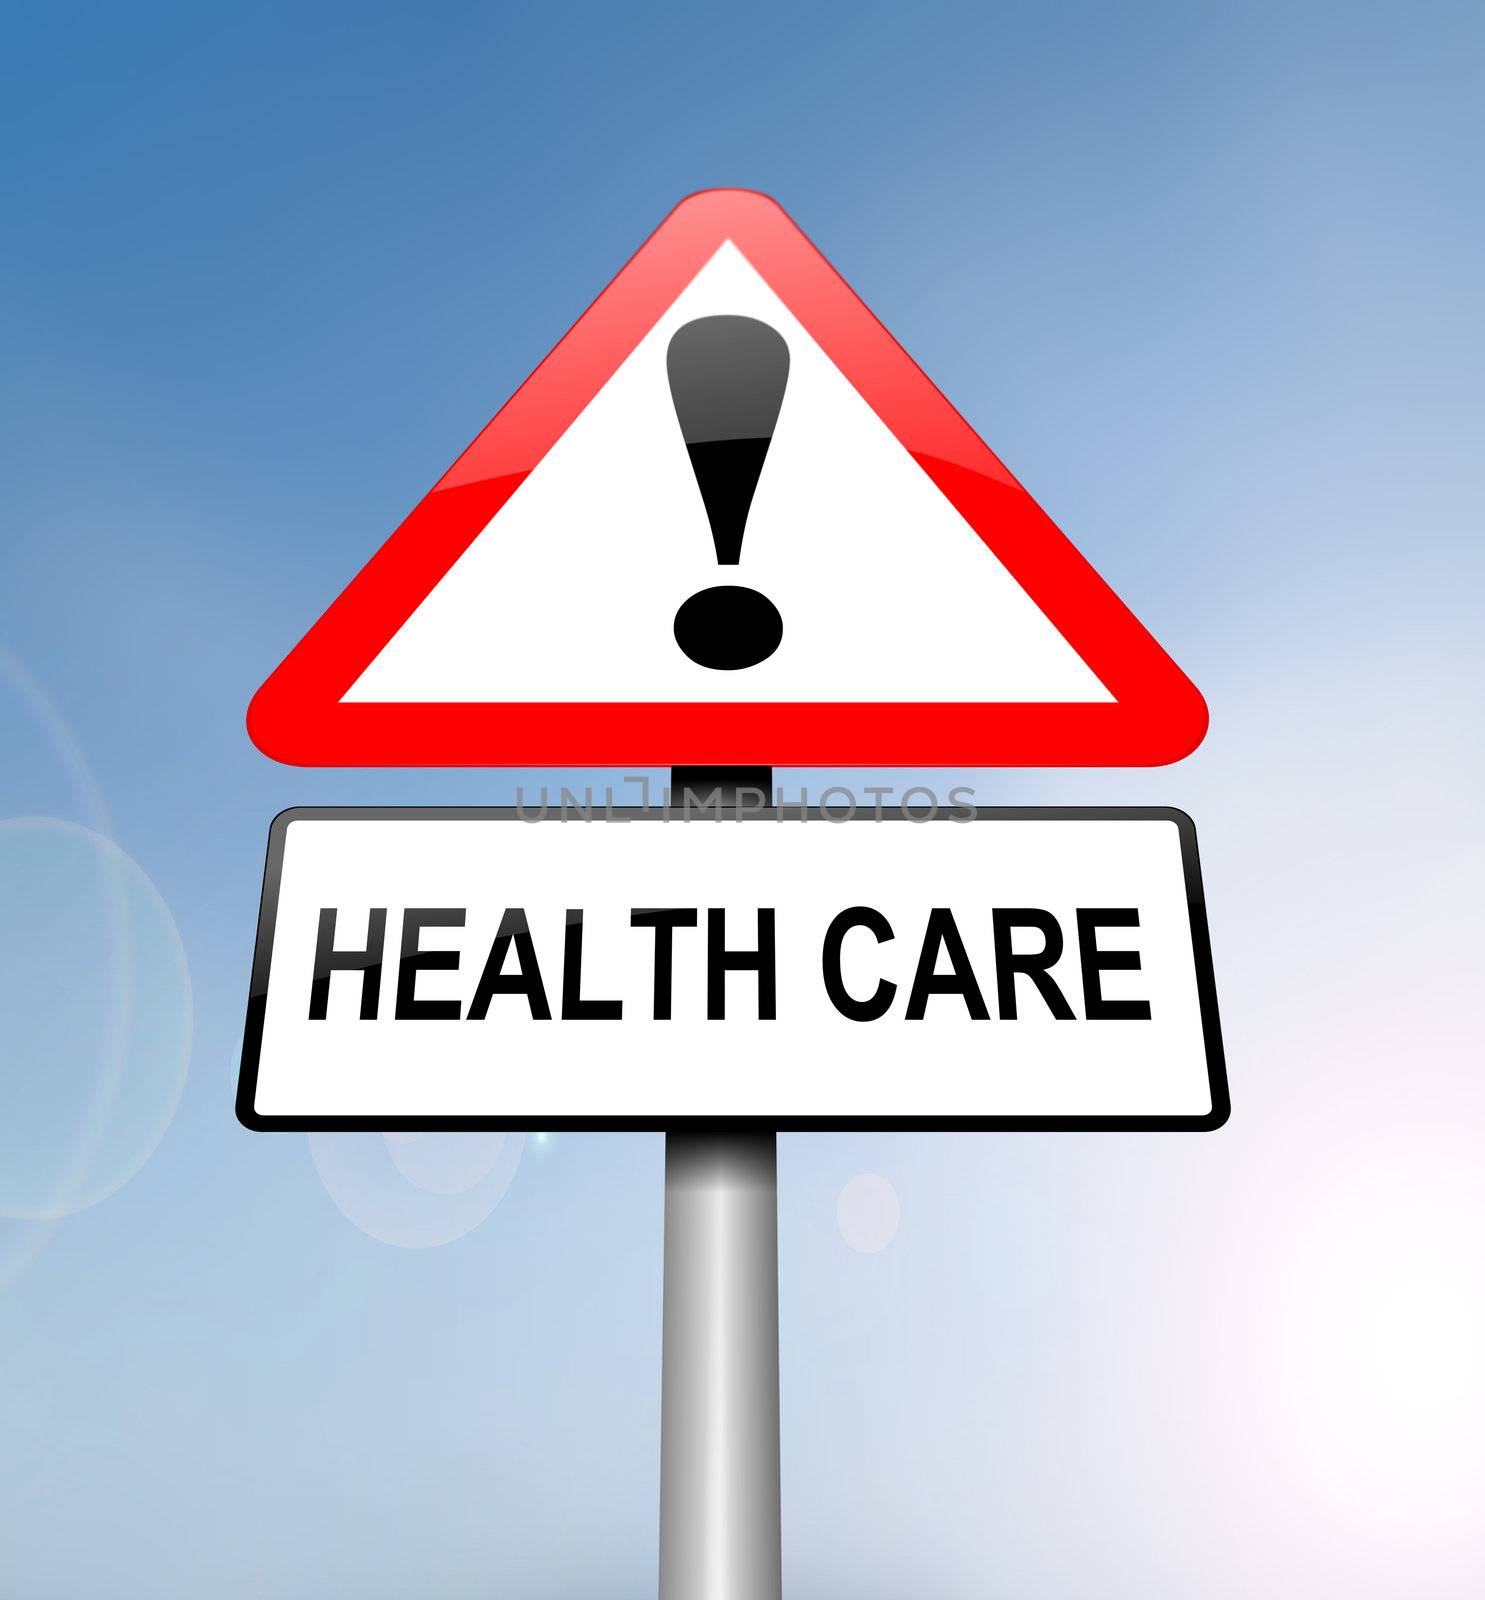 Illustration depicting a red and white triangular warning sign with a 'healthcare' concept. Blurred blue sky background.